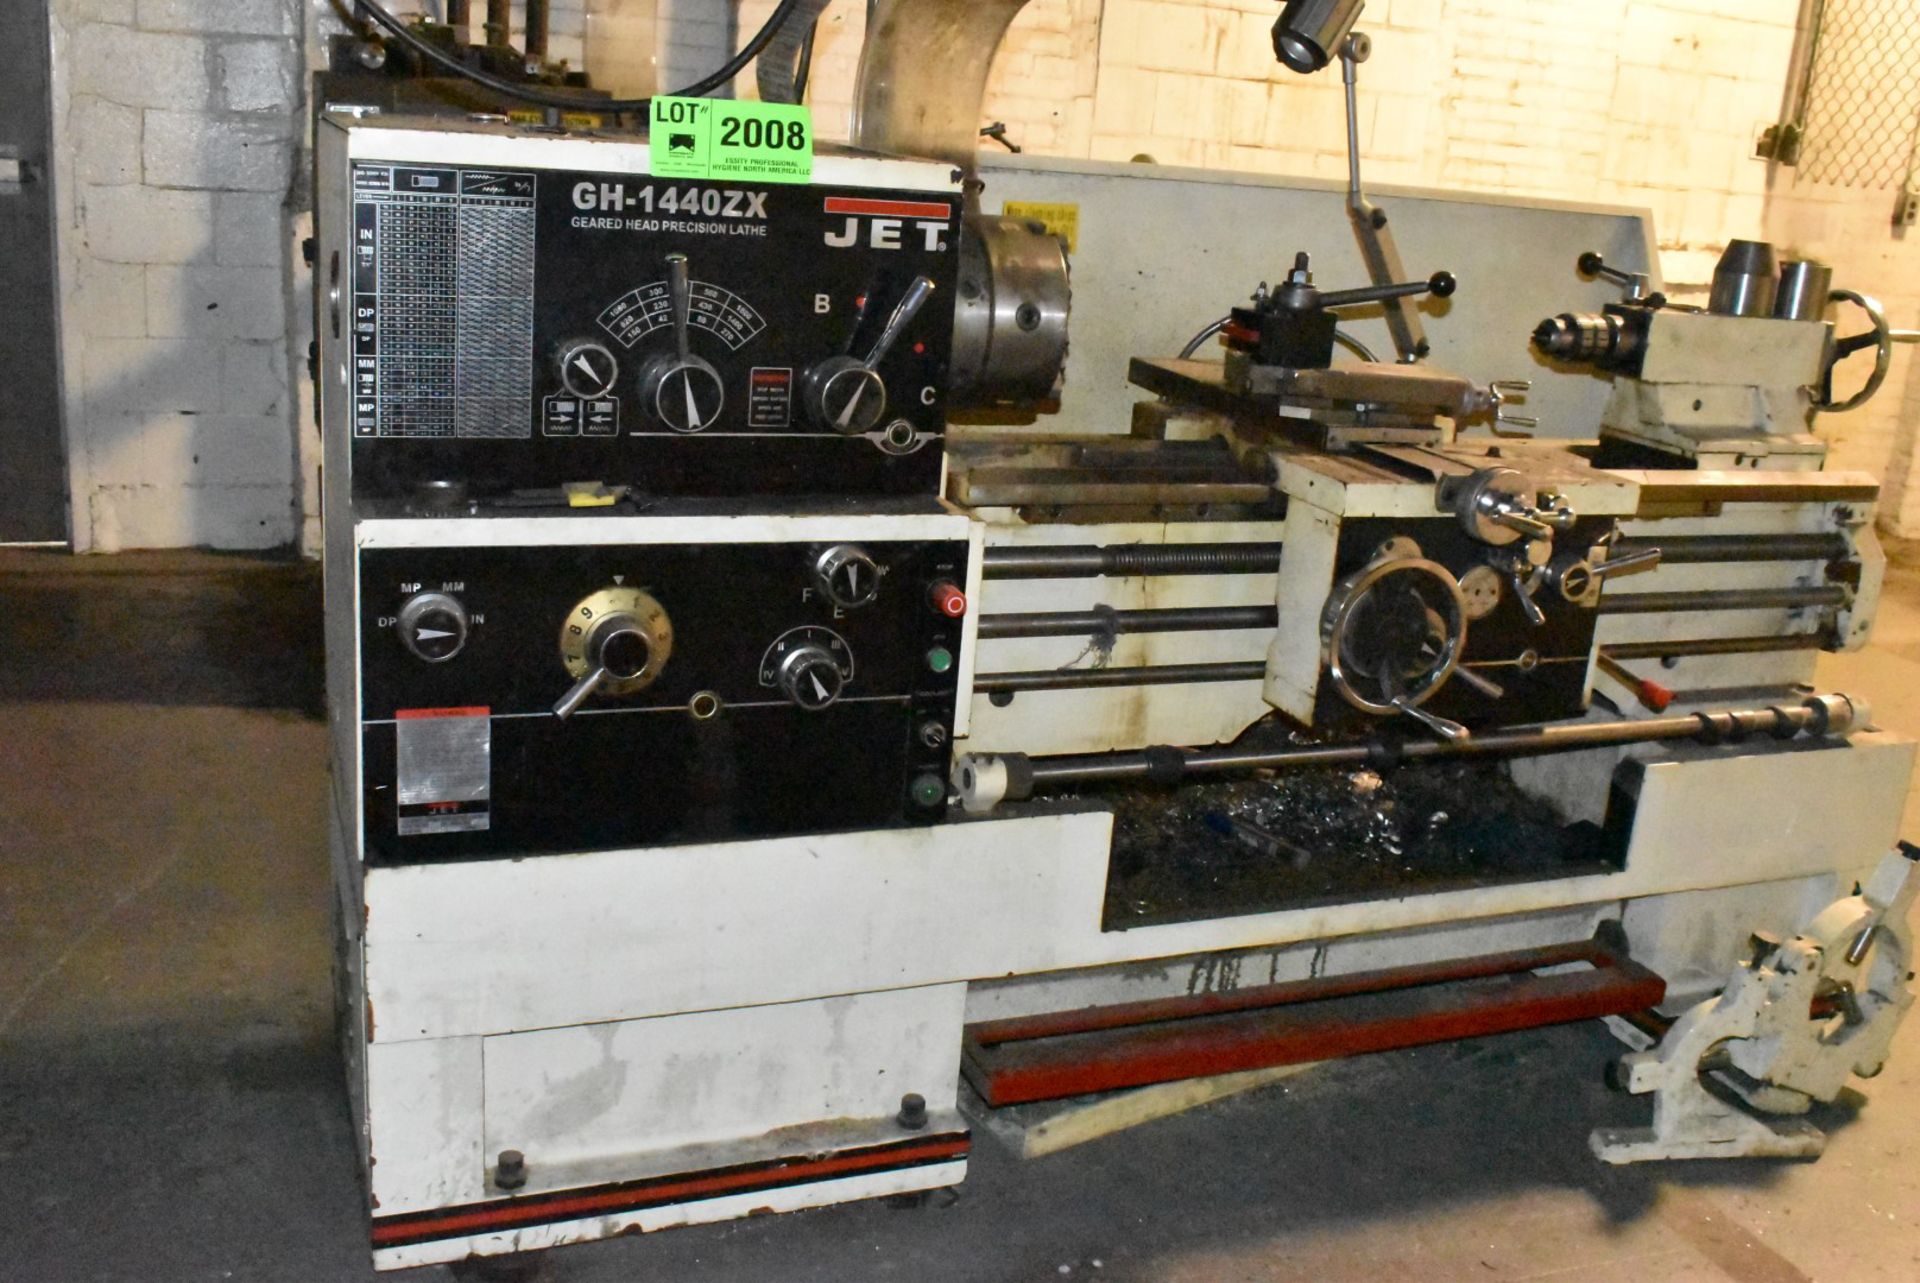 JET (2010) GH-1440ZX GAP BED ENGINE LATHE WITH 14" SWING OVER BED, 23" SWING IN THE GAP, 40" BETWEEN - Image 2 of 16